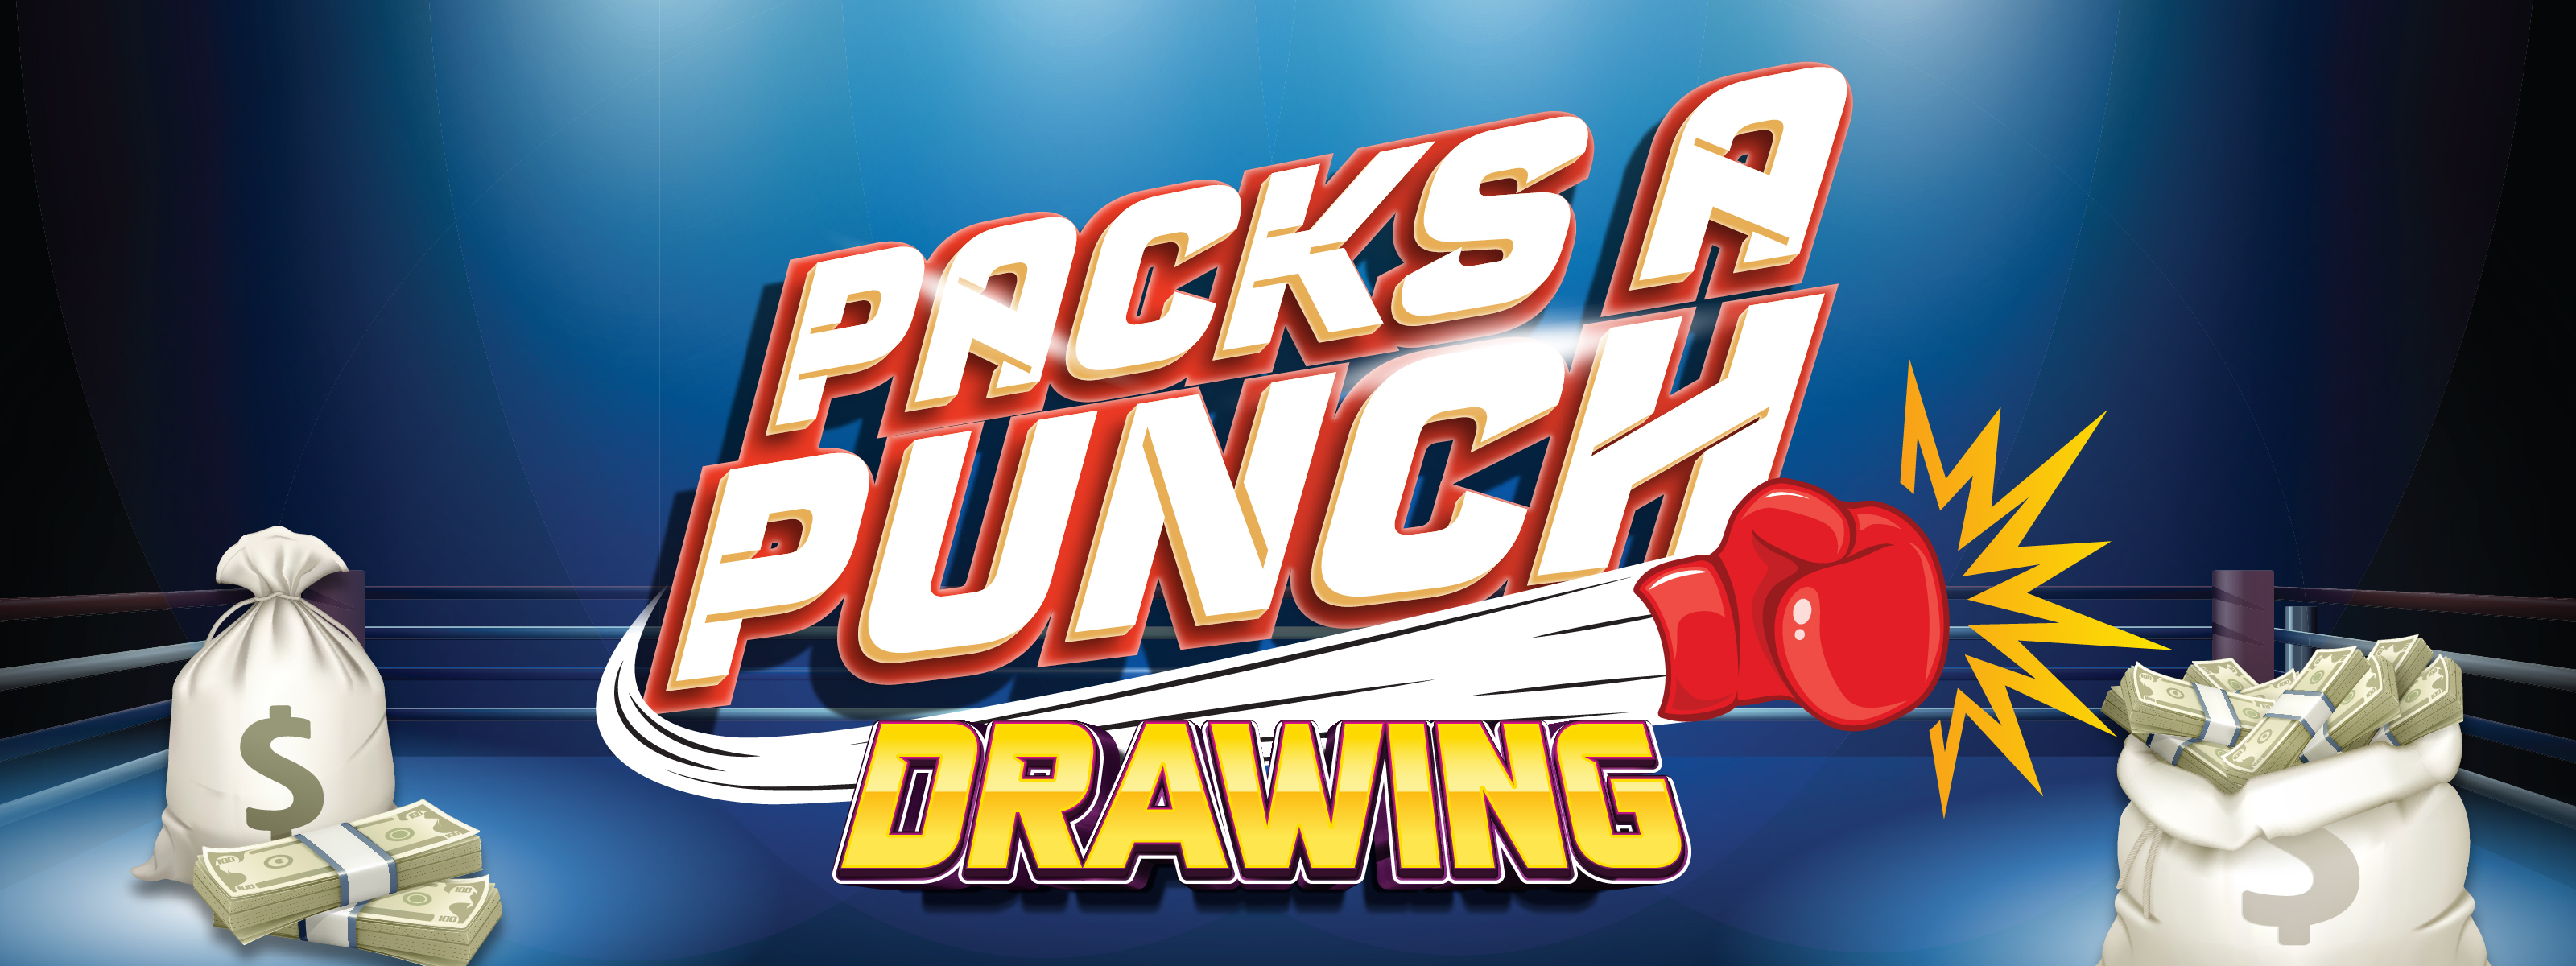 packs a punch drawing